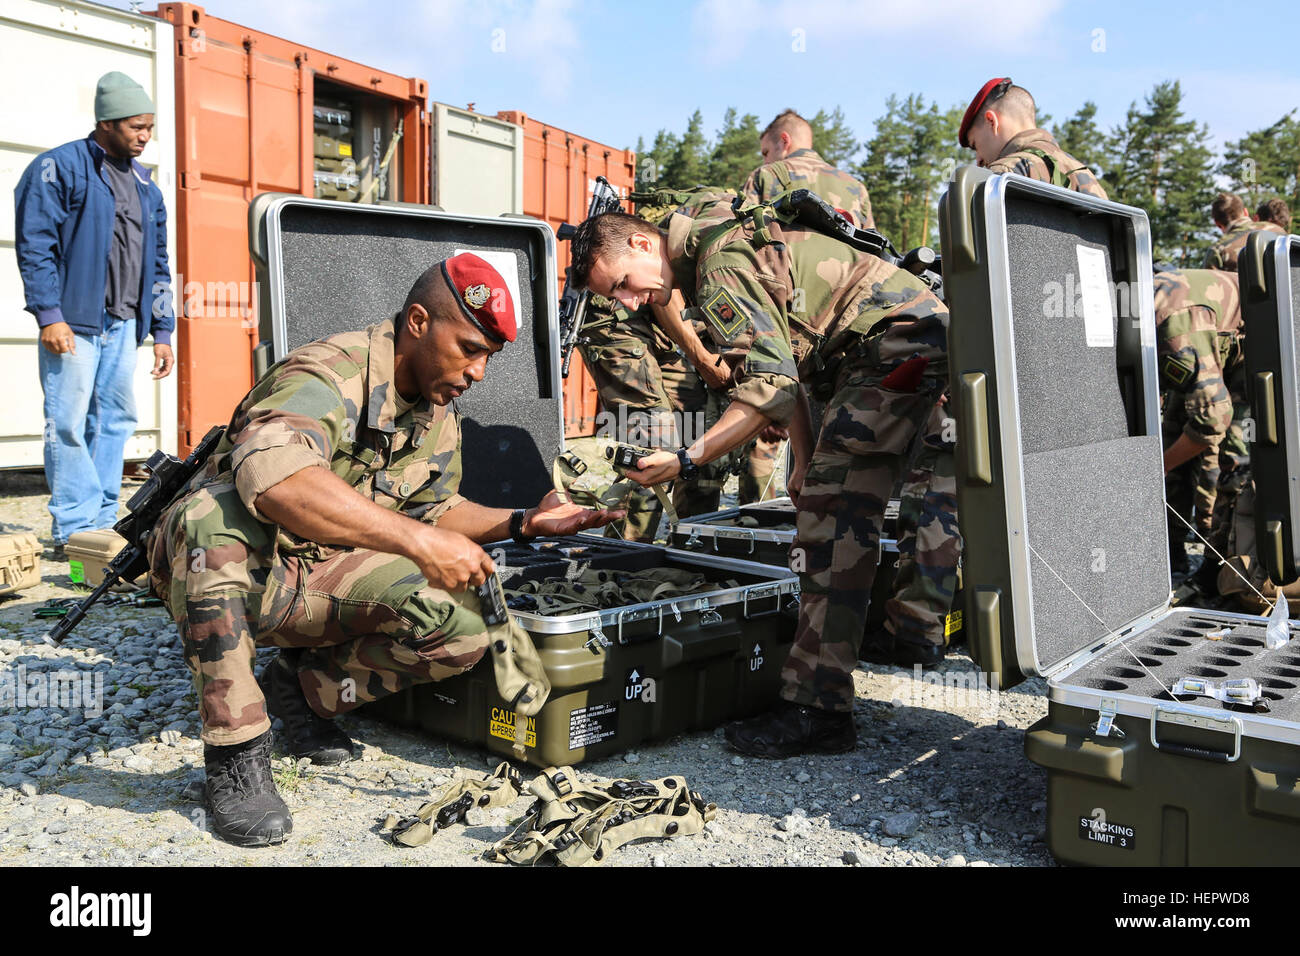 French soldiers of the 17th Parachute Engineer Regiment organize equipment while conducting Multiple Integrated Laser Engagement System (MILES) installation for Swift Response 16 training exercise at the Grafenwoehr Training Area, a part of the Joint Multinational Readiness Center, in Grafenwoehr, Germany, Jun. 10, 2016. Exercise Swift Response is one of the premier military crisis response training events for multi-national airborne forces in the world. The exercise is designed to enhance the readiness of the combat core of the U.S. Global Response Force – currently the 82nd Airborne Division Stock Photo